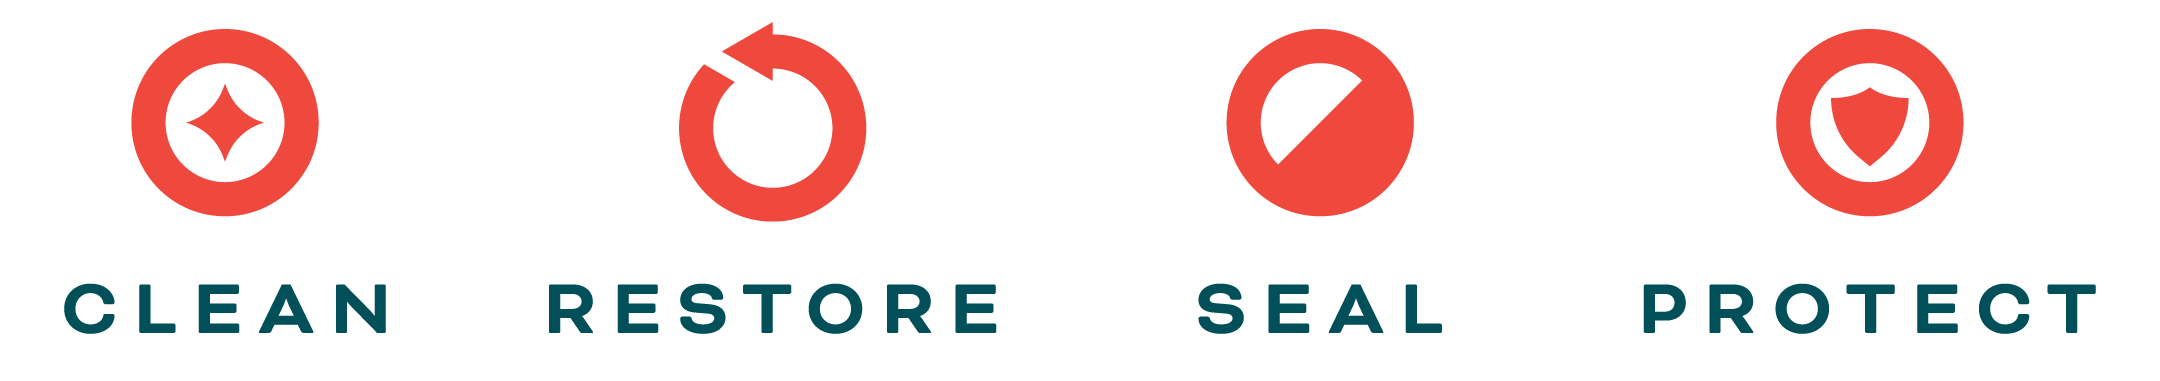 Forte Surfaces Tagline with corresponding icons. text in teal and icons are in red. Text reads Clean Restore Seal Protect